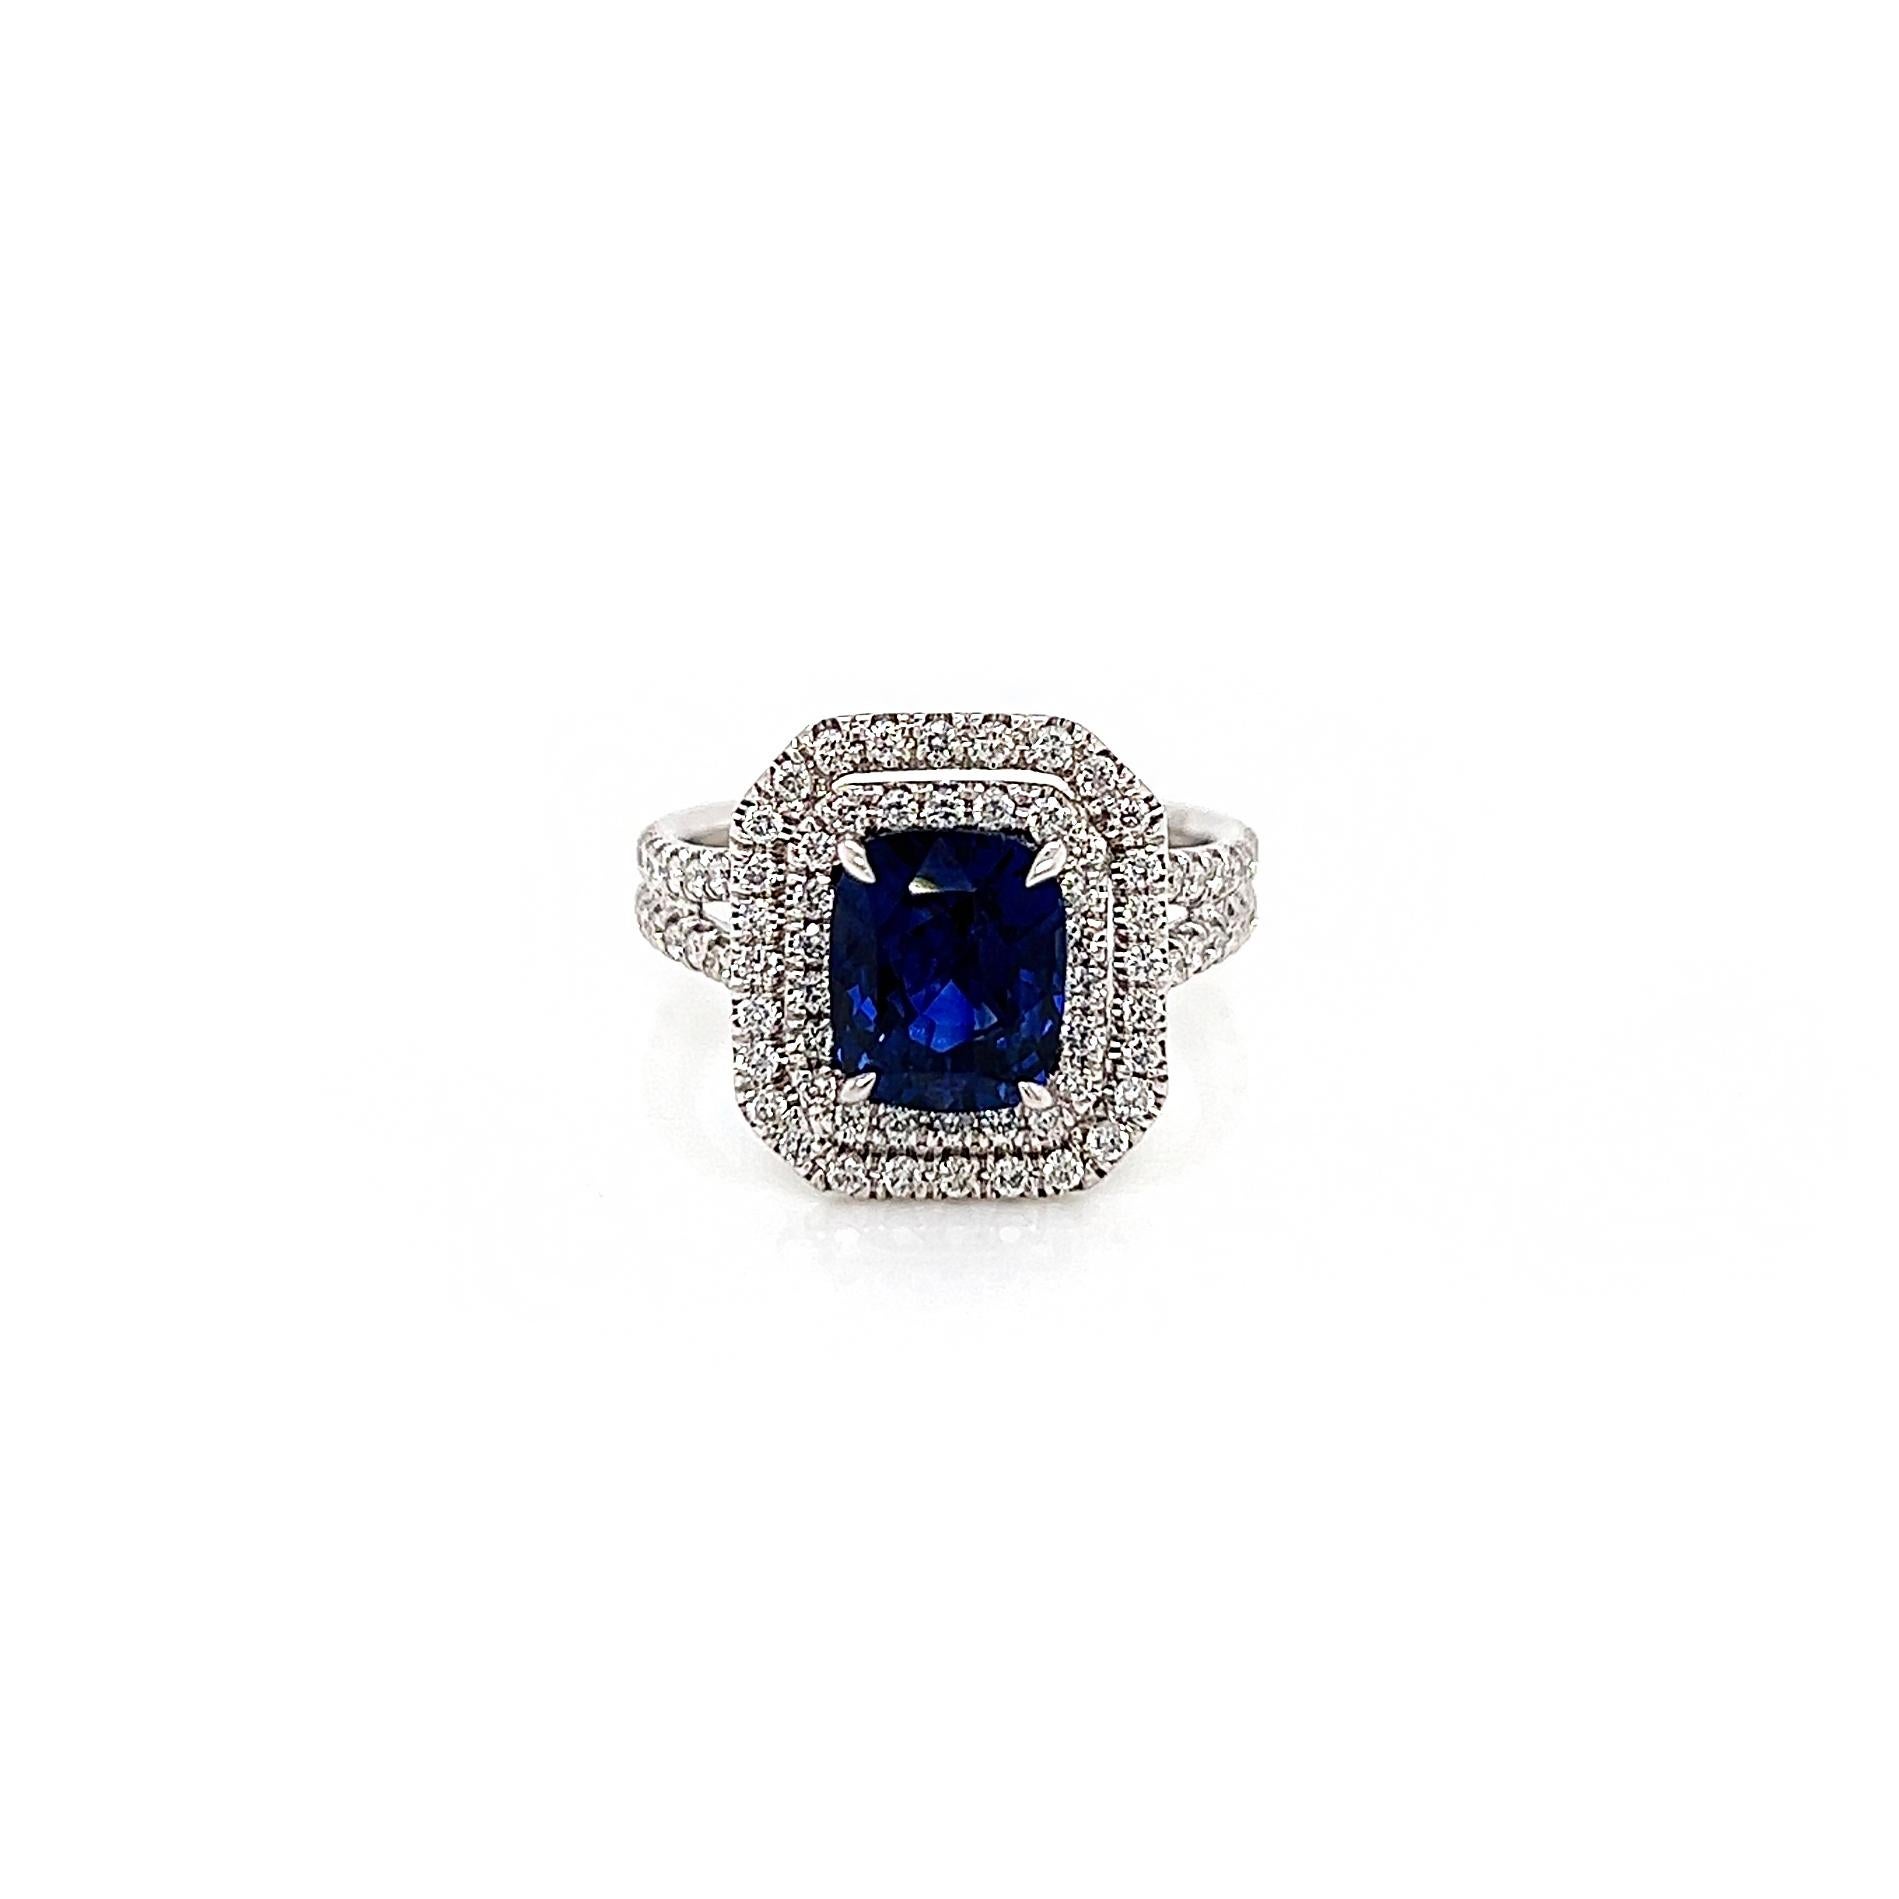 3.49 Total Carat Sapphire and Diamond Double-Halo Micro Pave-Set Ladies Ring

-Metal Type: 18K White Gold, Split Shank
-2.67 Carat Cushion Cut Natural Blue Sapphire
-0.82 Carat Round Natural Diamonds. F-G Color, VS-SI Clarity 

-Size 6.25

Made in